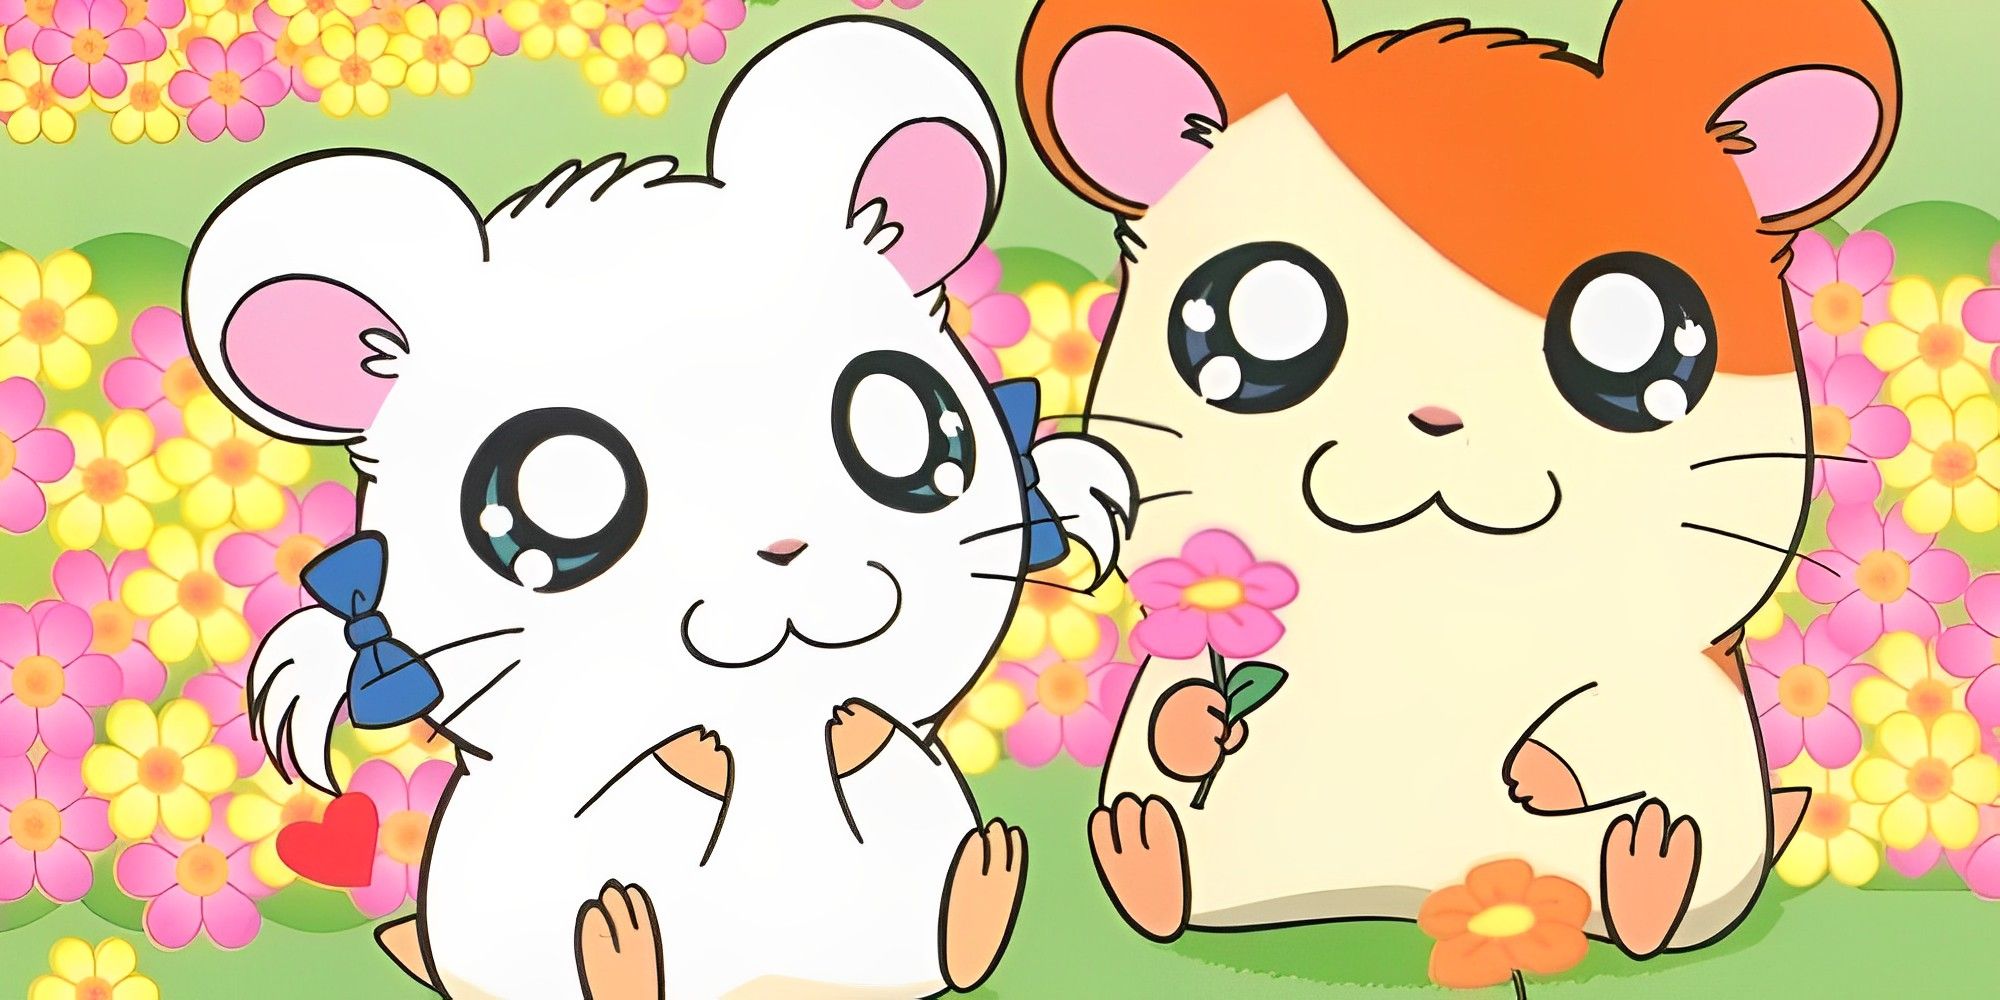 Hamtaro and Bijou from Hamtaro sitting together in a field of flowers